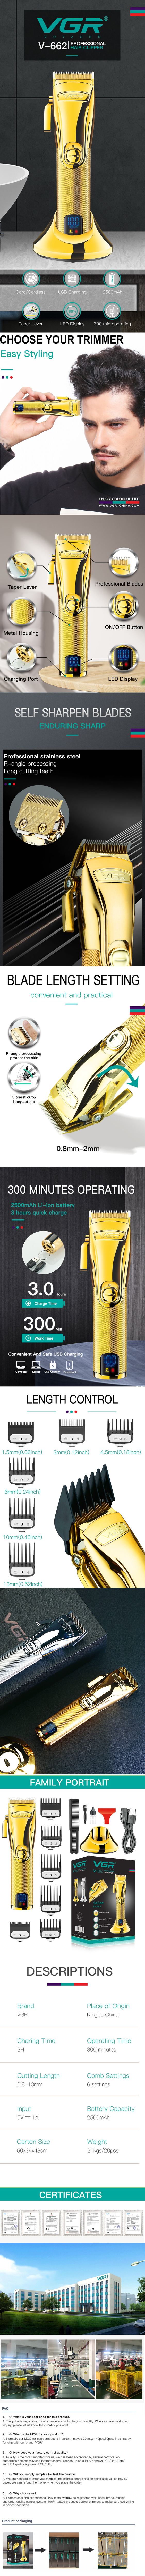 Wholesale Top Rated Rechargeable Cordless Hair Clipper Brand Factory